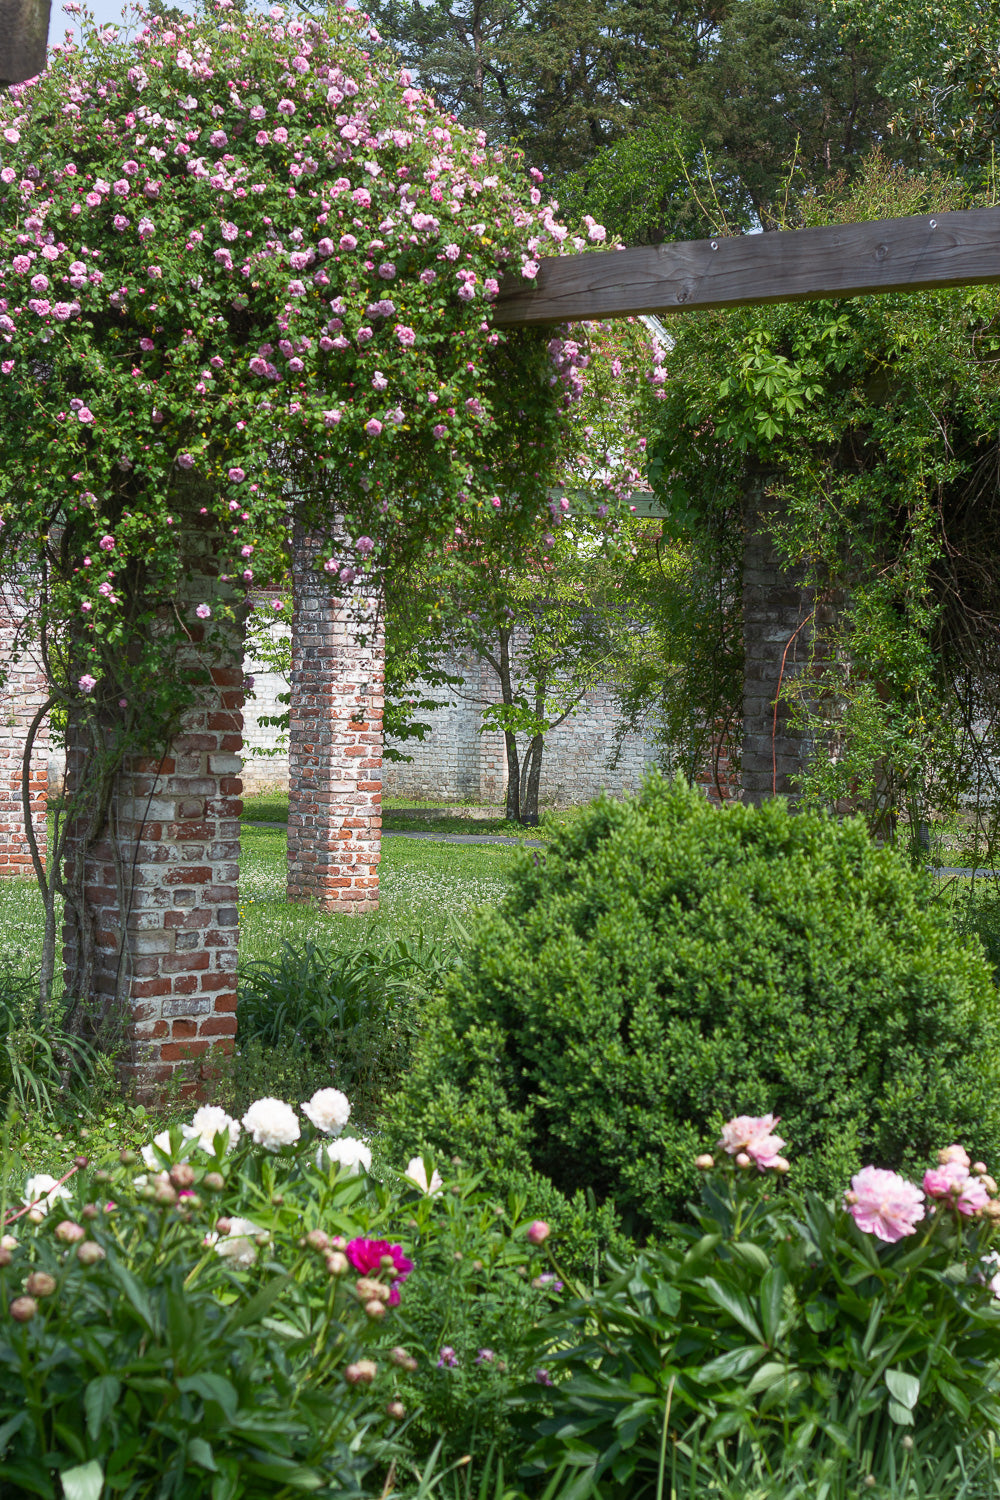 Gardens with climbing roses and peonies